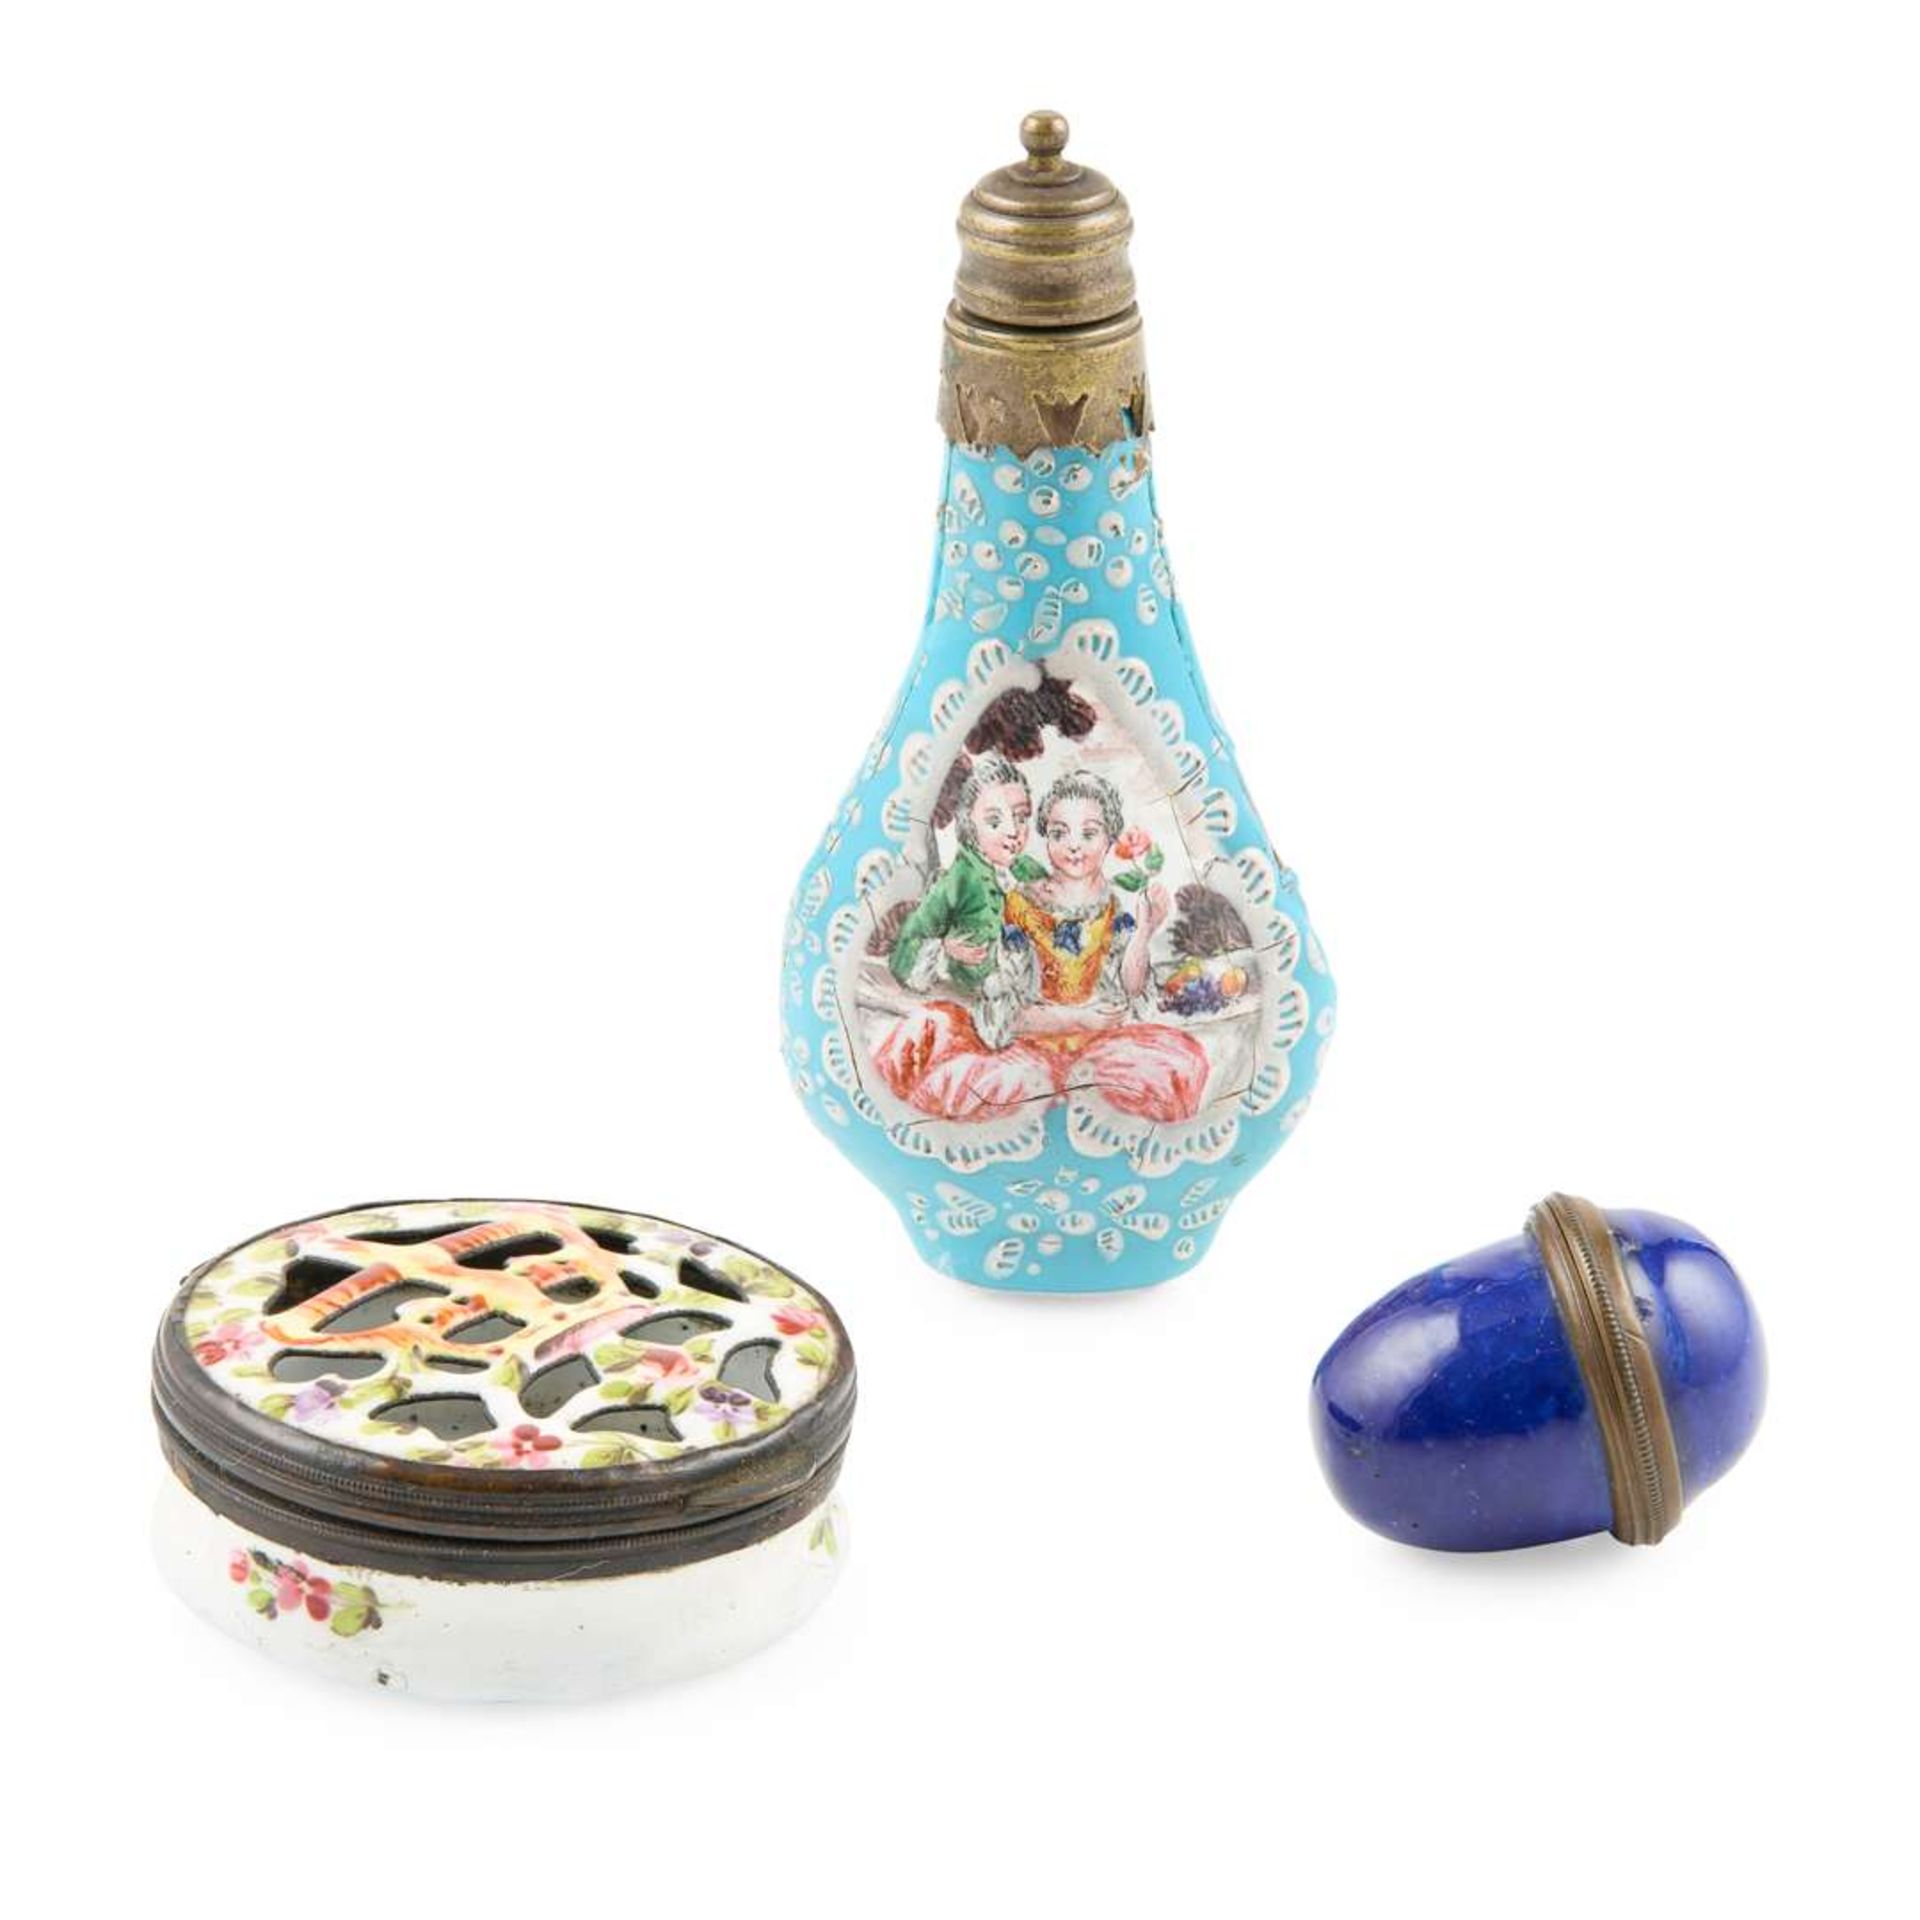 GROUP OF THREE ENAMEL SCENT CONTAINERS